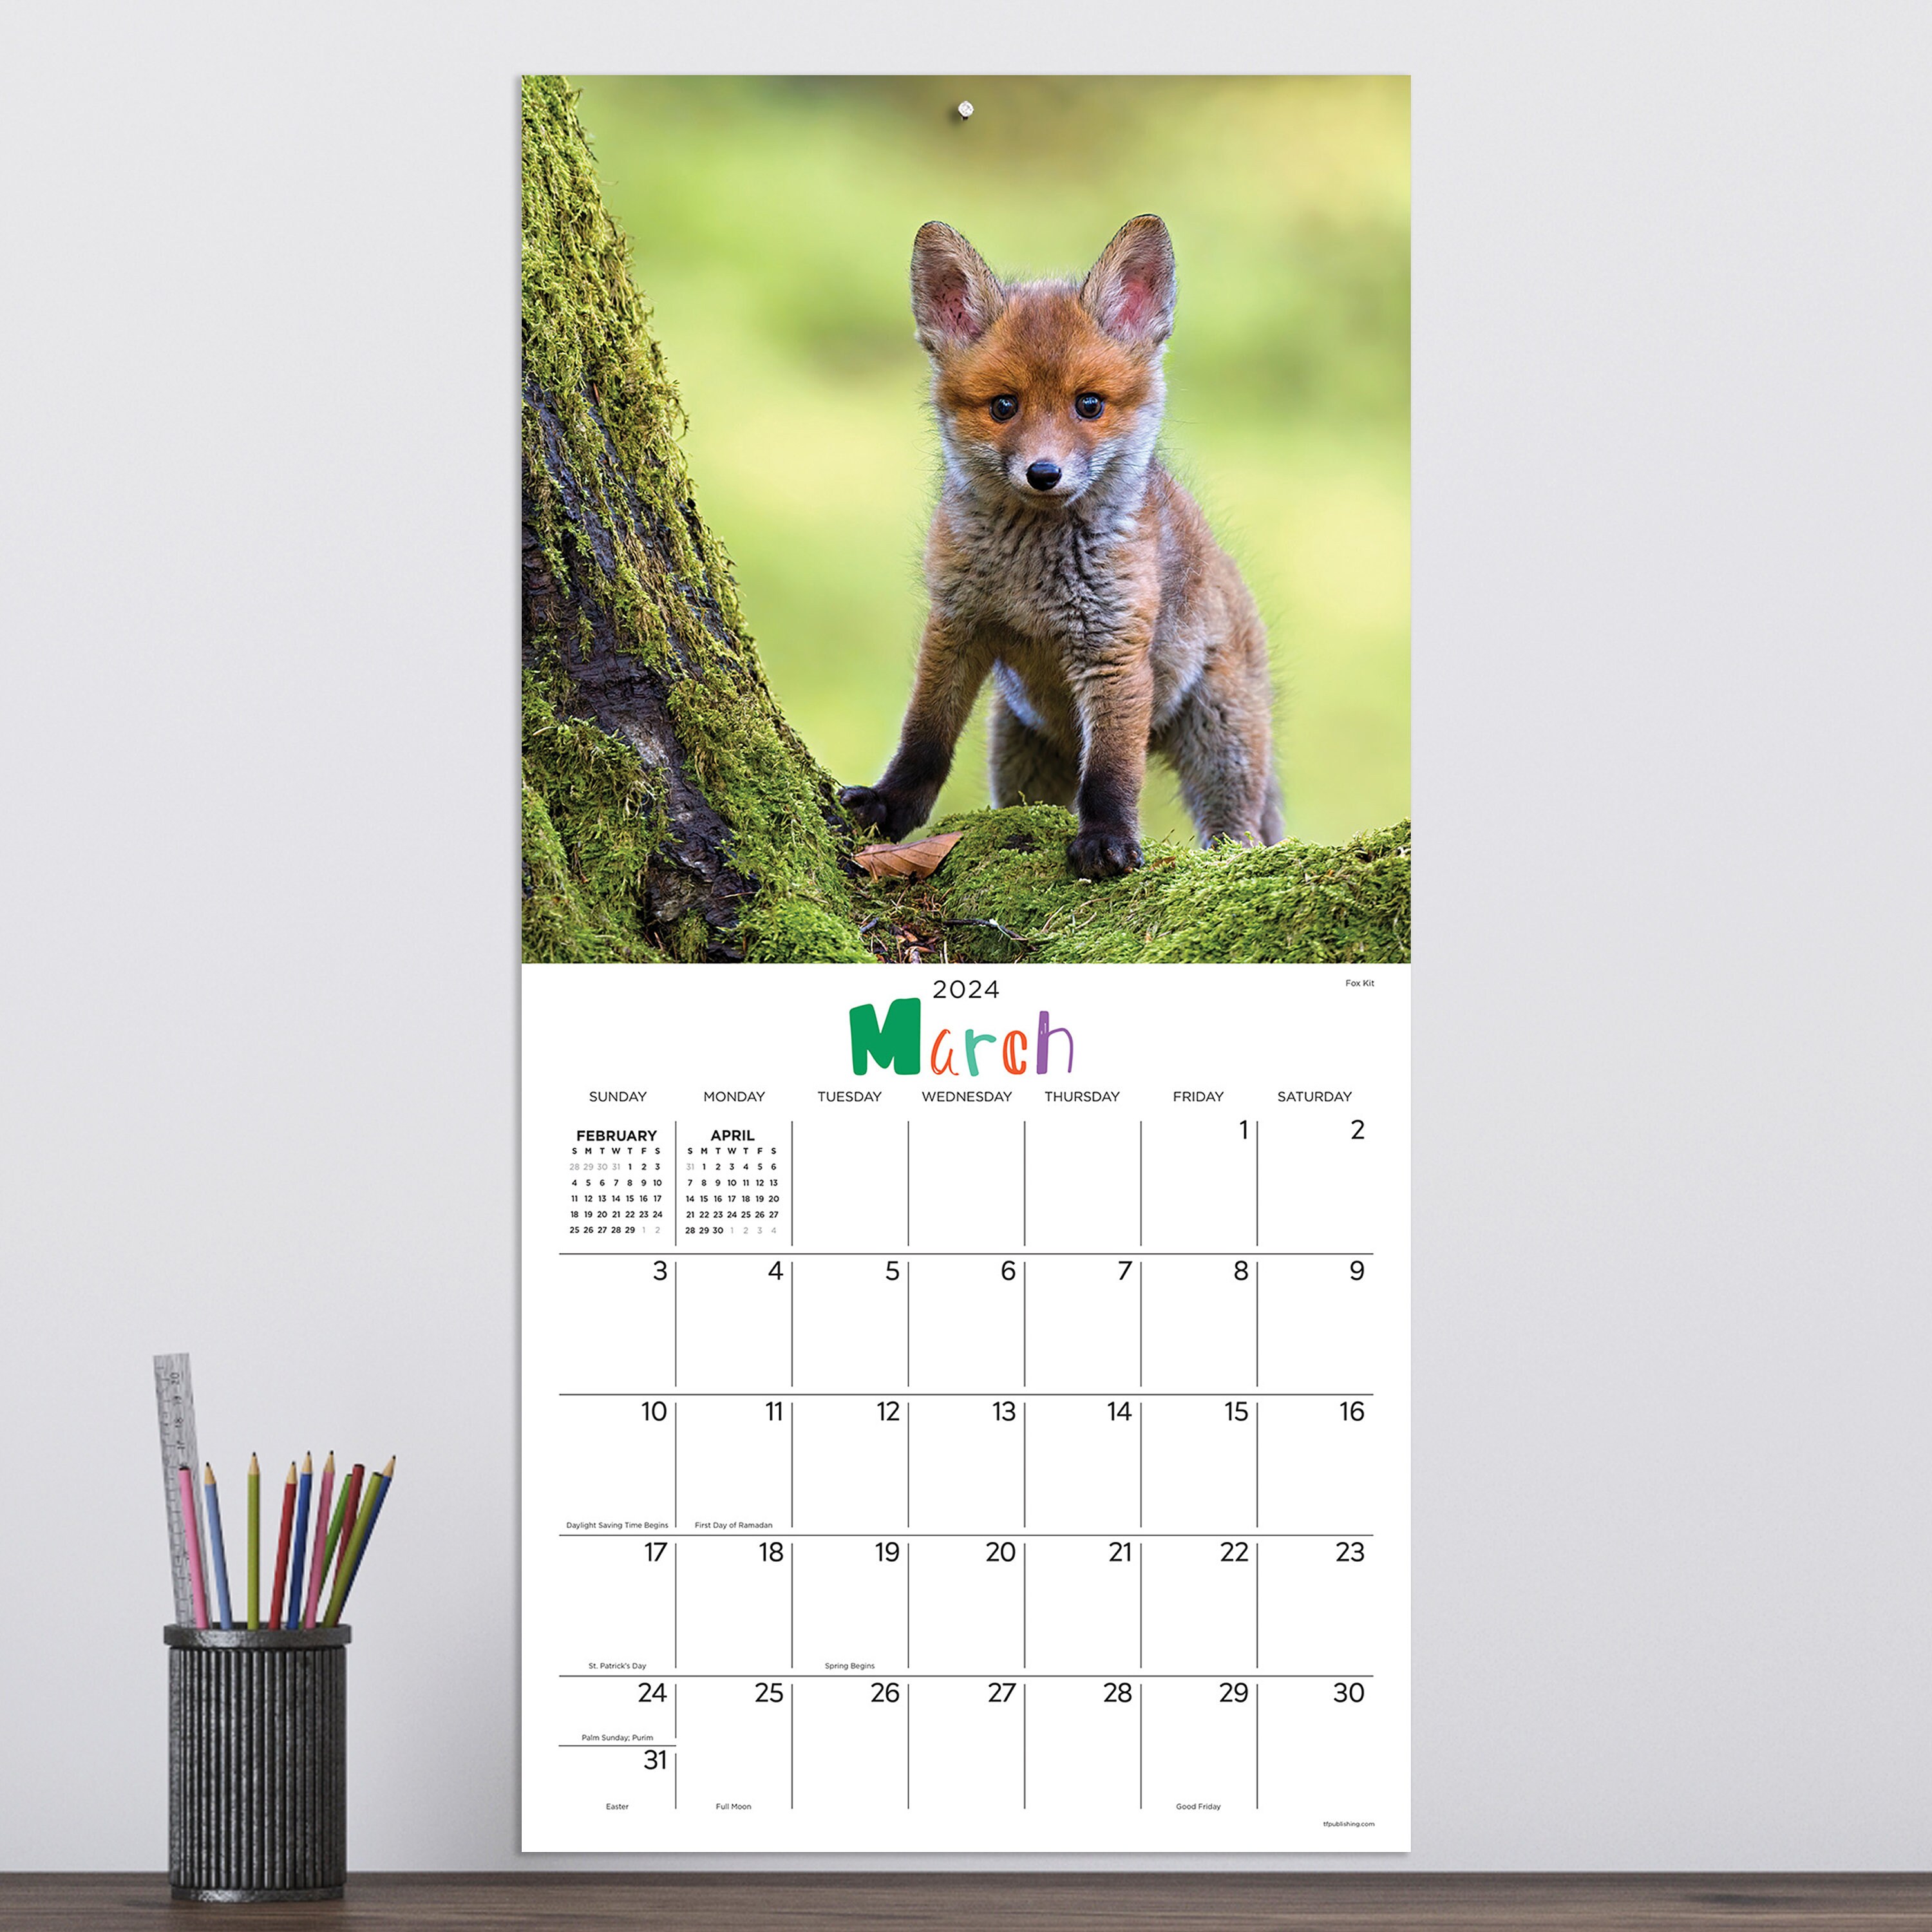 Calendrier Bebes Animaux 2024